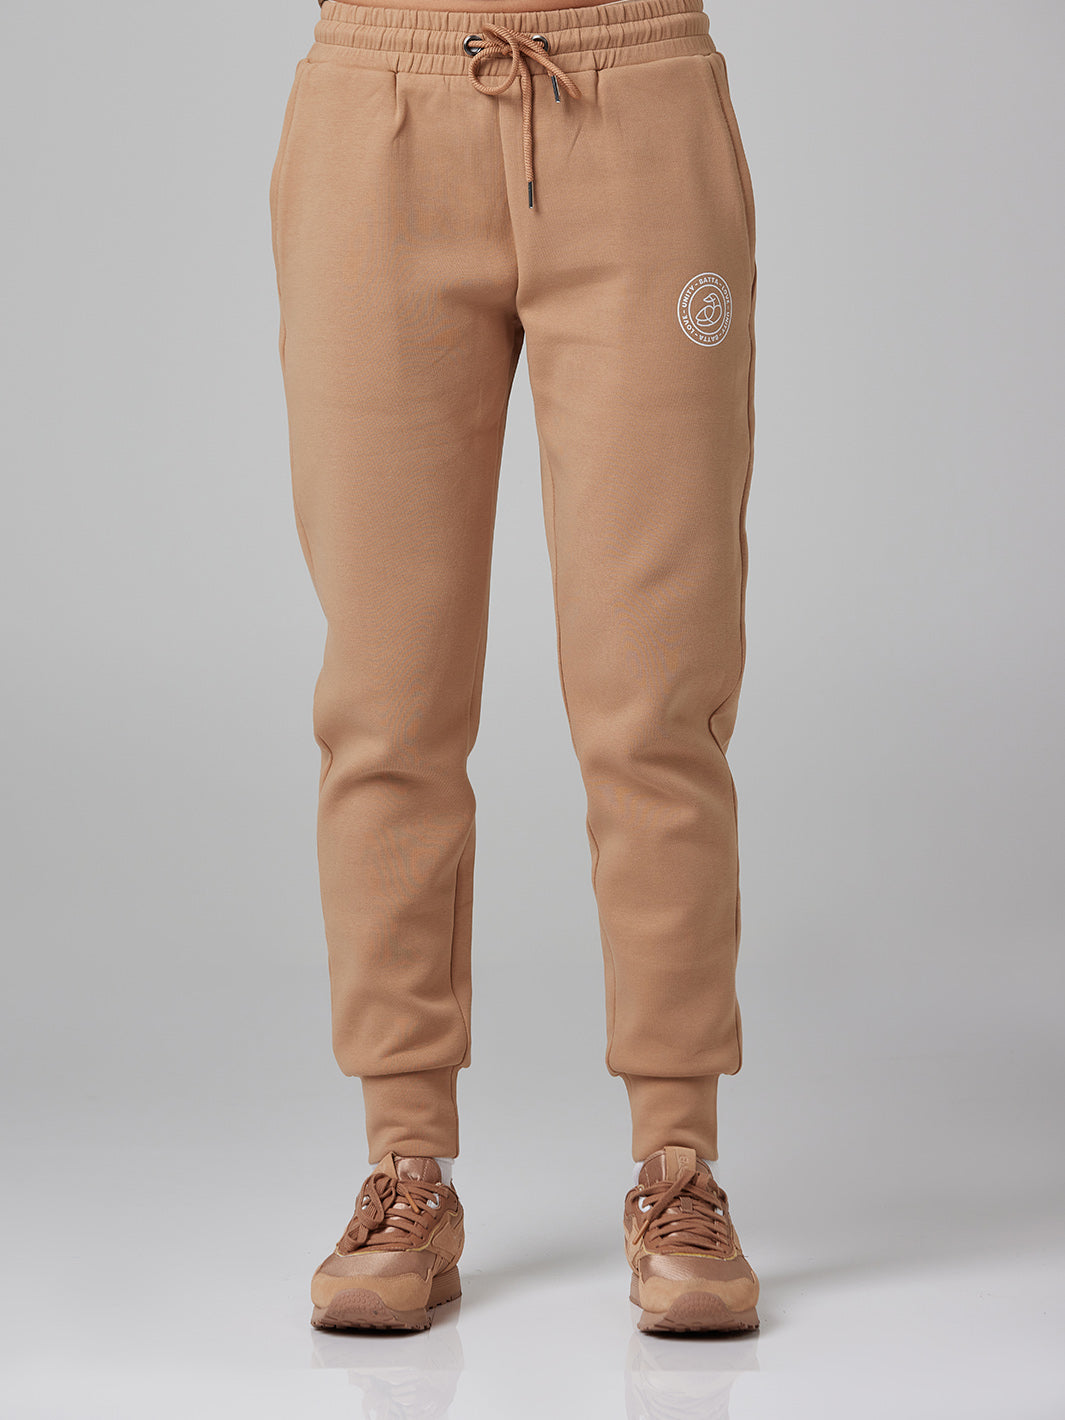 Women Limited Edition Pant